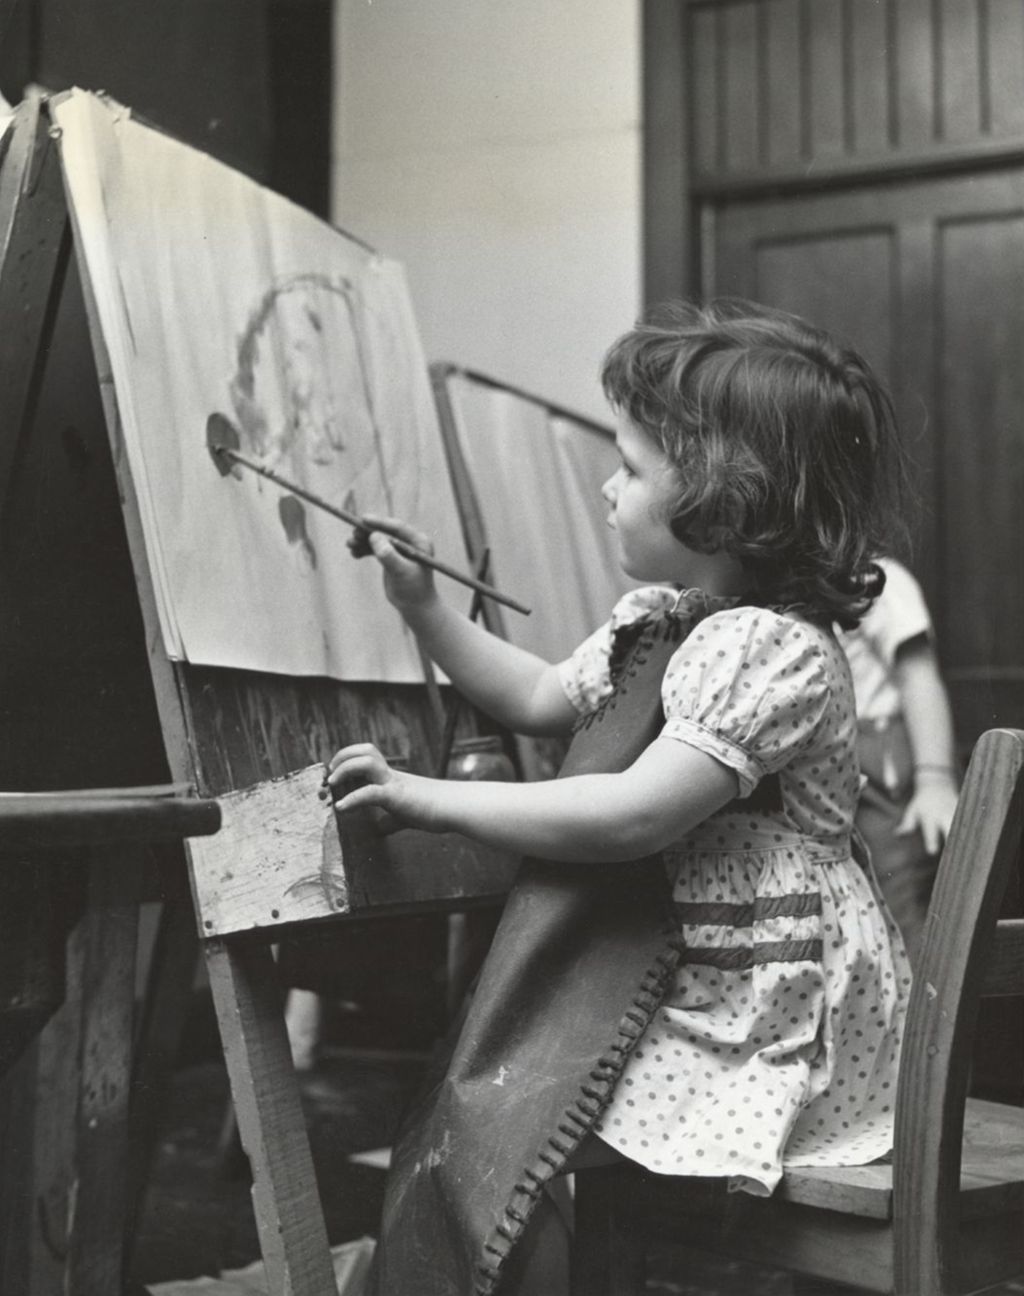 Young girl painting at easel in art class